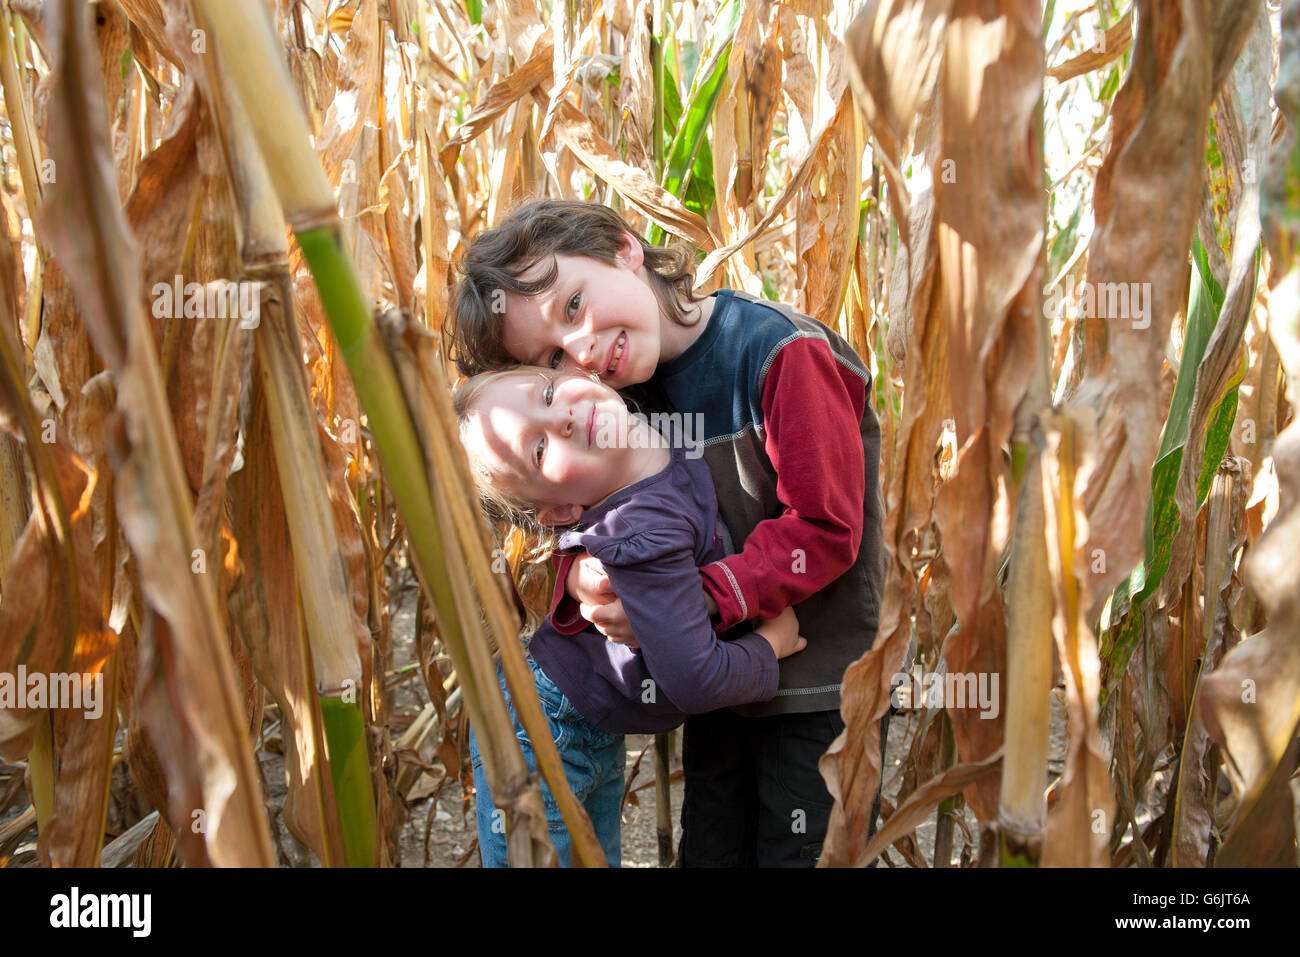 Young siblings embracing in cornfield, portrait Stock Photo